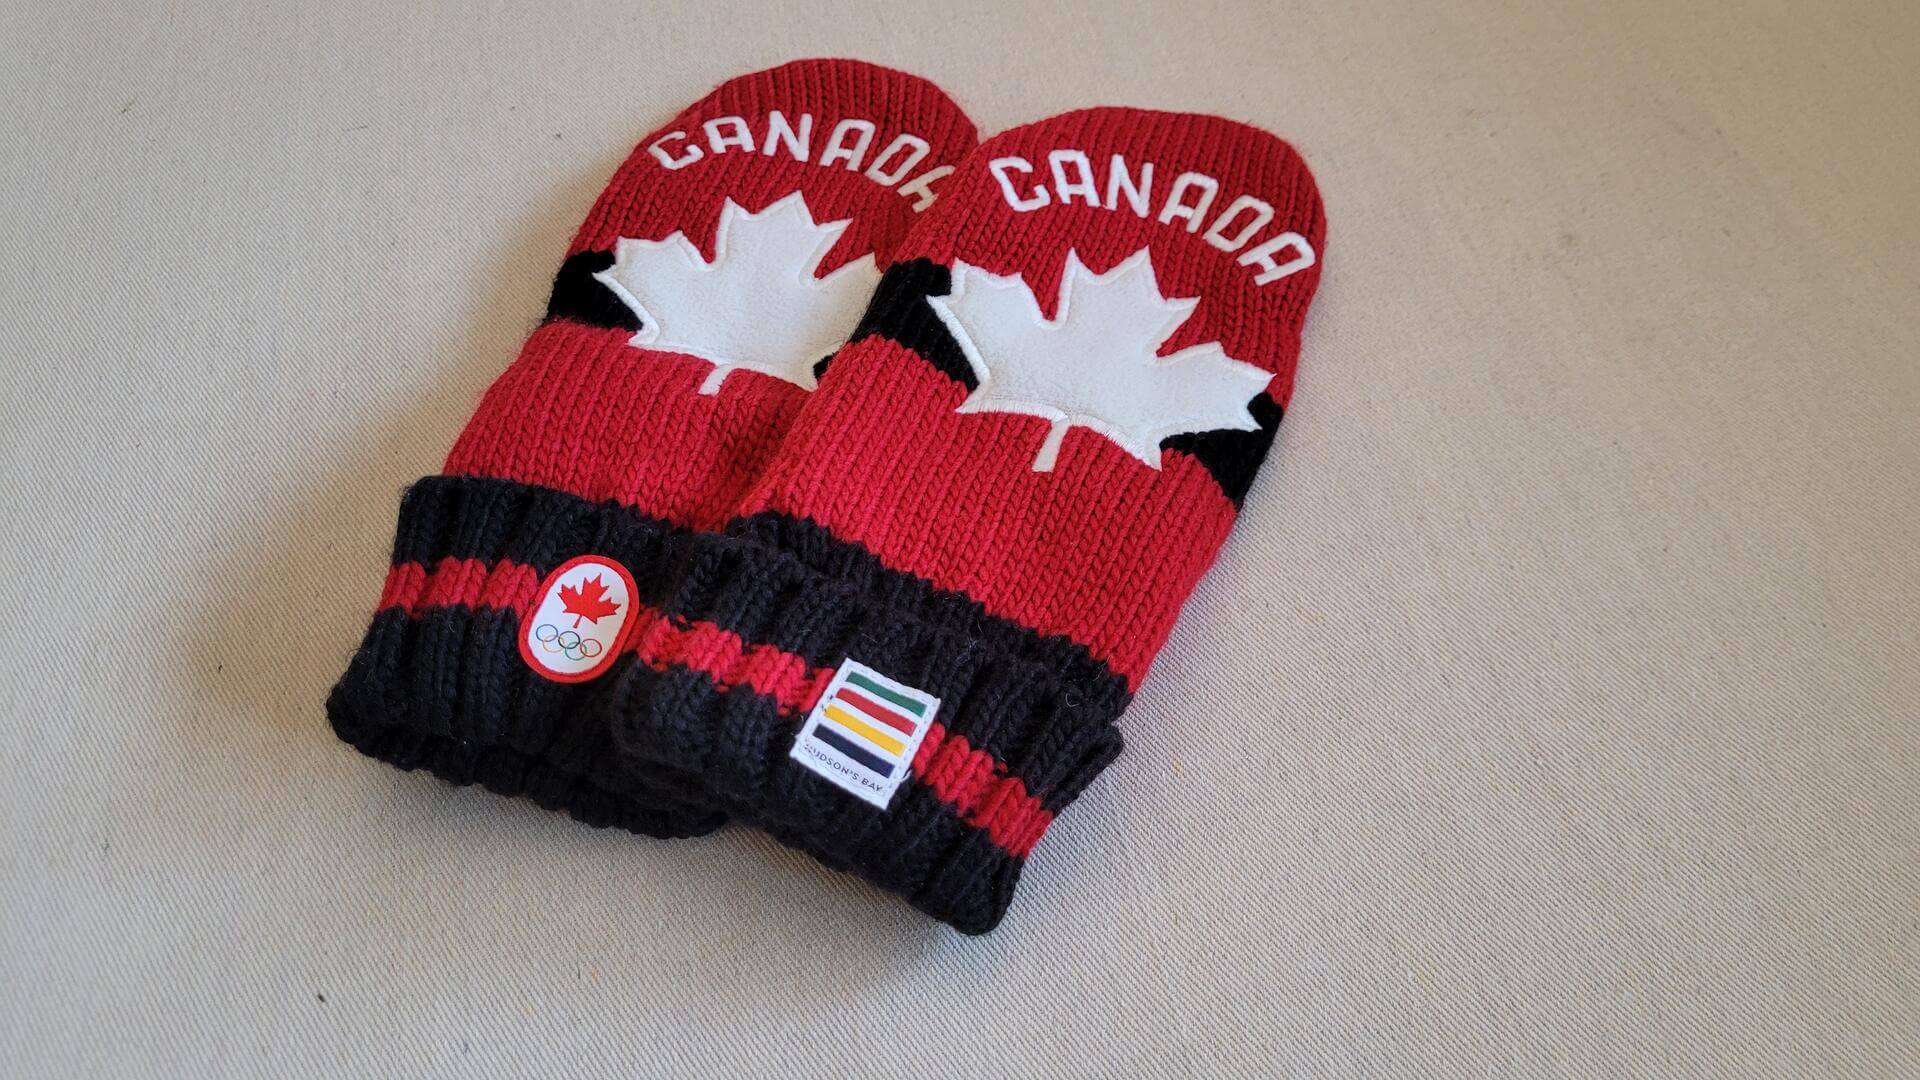 Nice pair of Canadian Olympic Foundation mittens by HBC Hudson's Bay Company. On November 21st, National Red Mitten Day encourages Canadians to wear their Red Mittens in support of Canadian athletes.